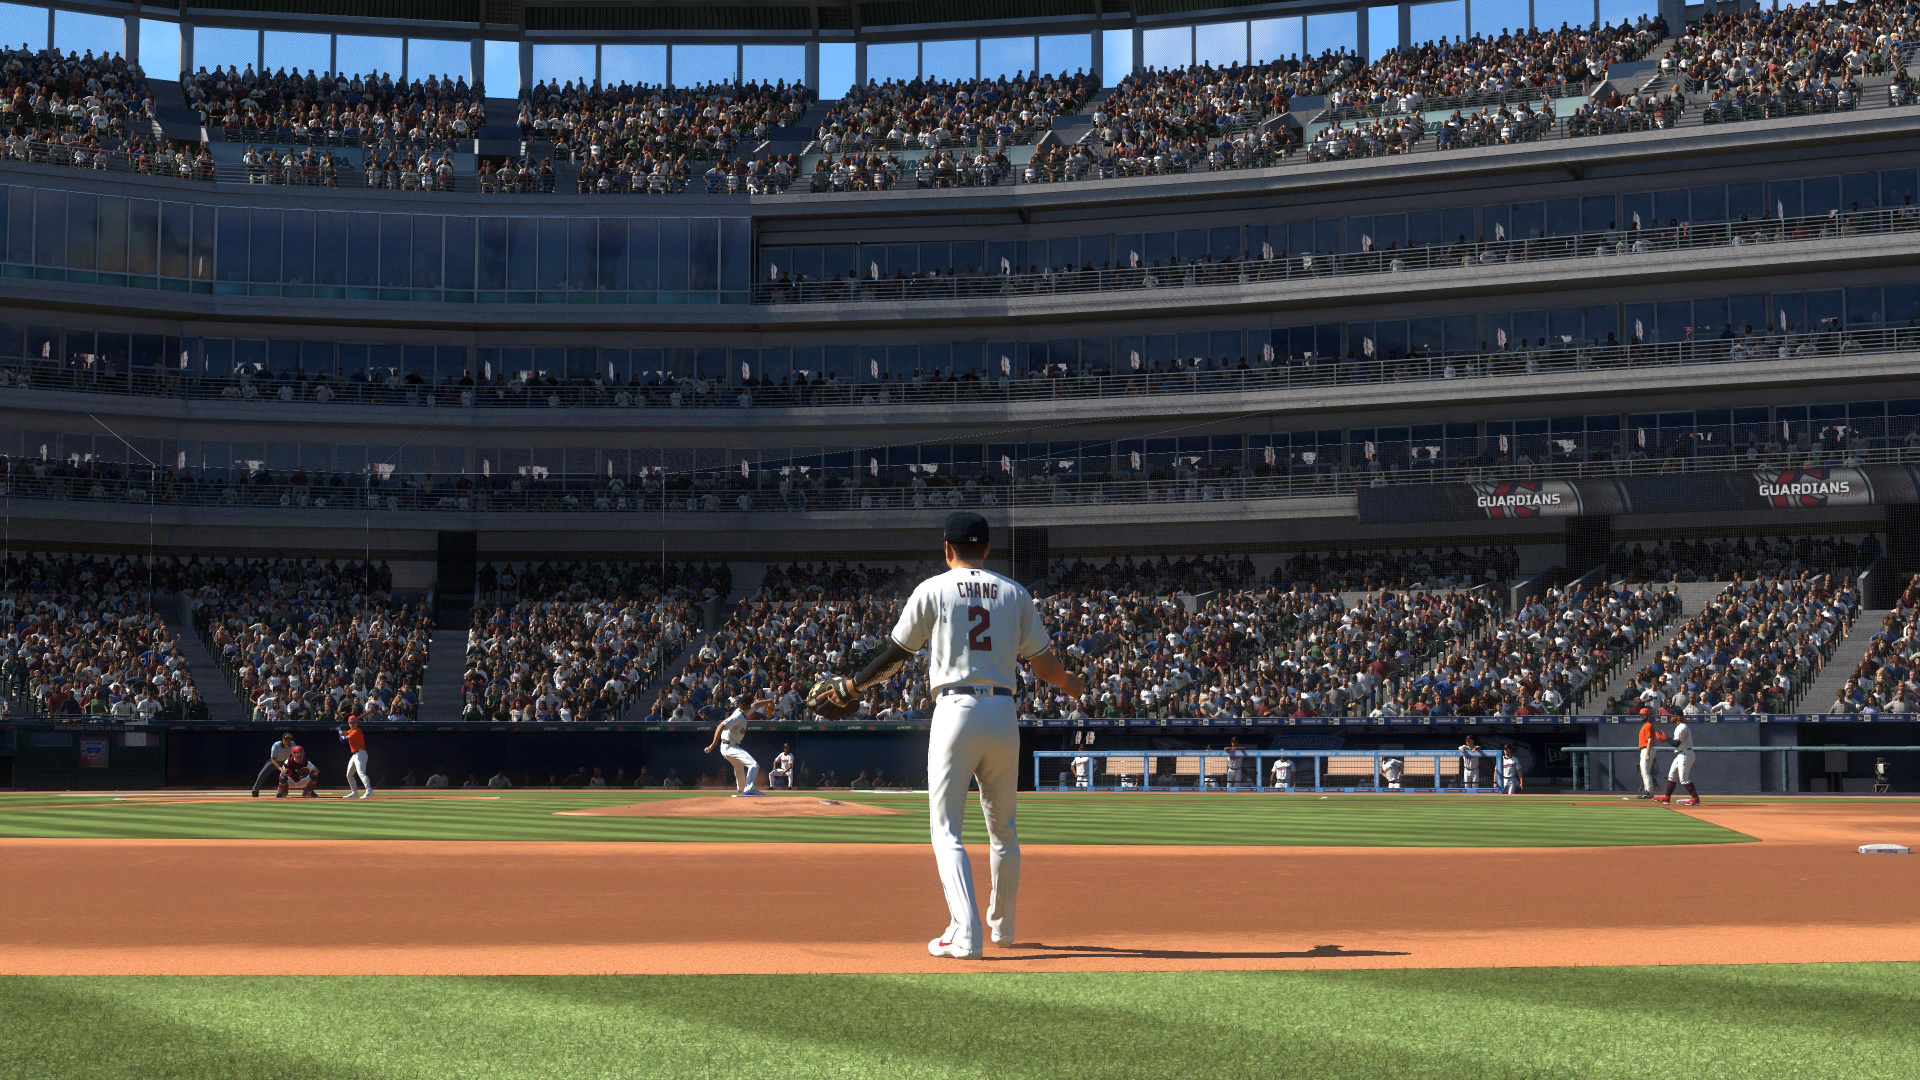 MLB The Show 22 - PlayStation 5